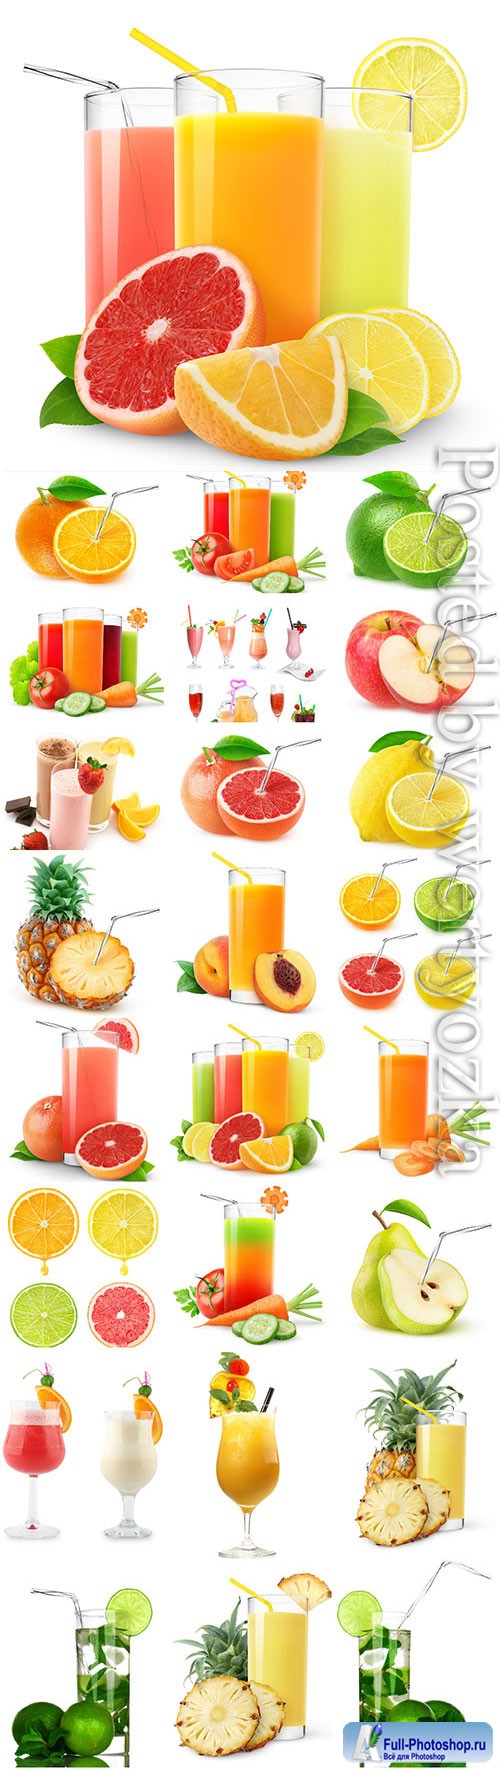 Cocktails and fresh juices stock photo